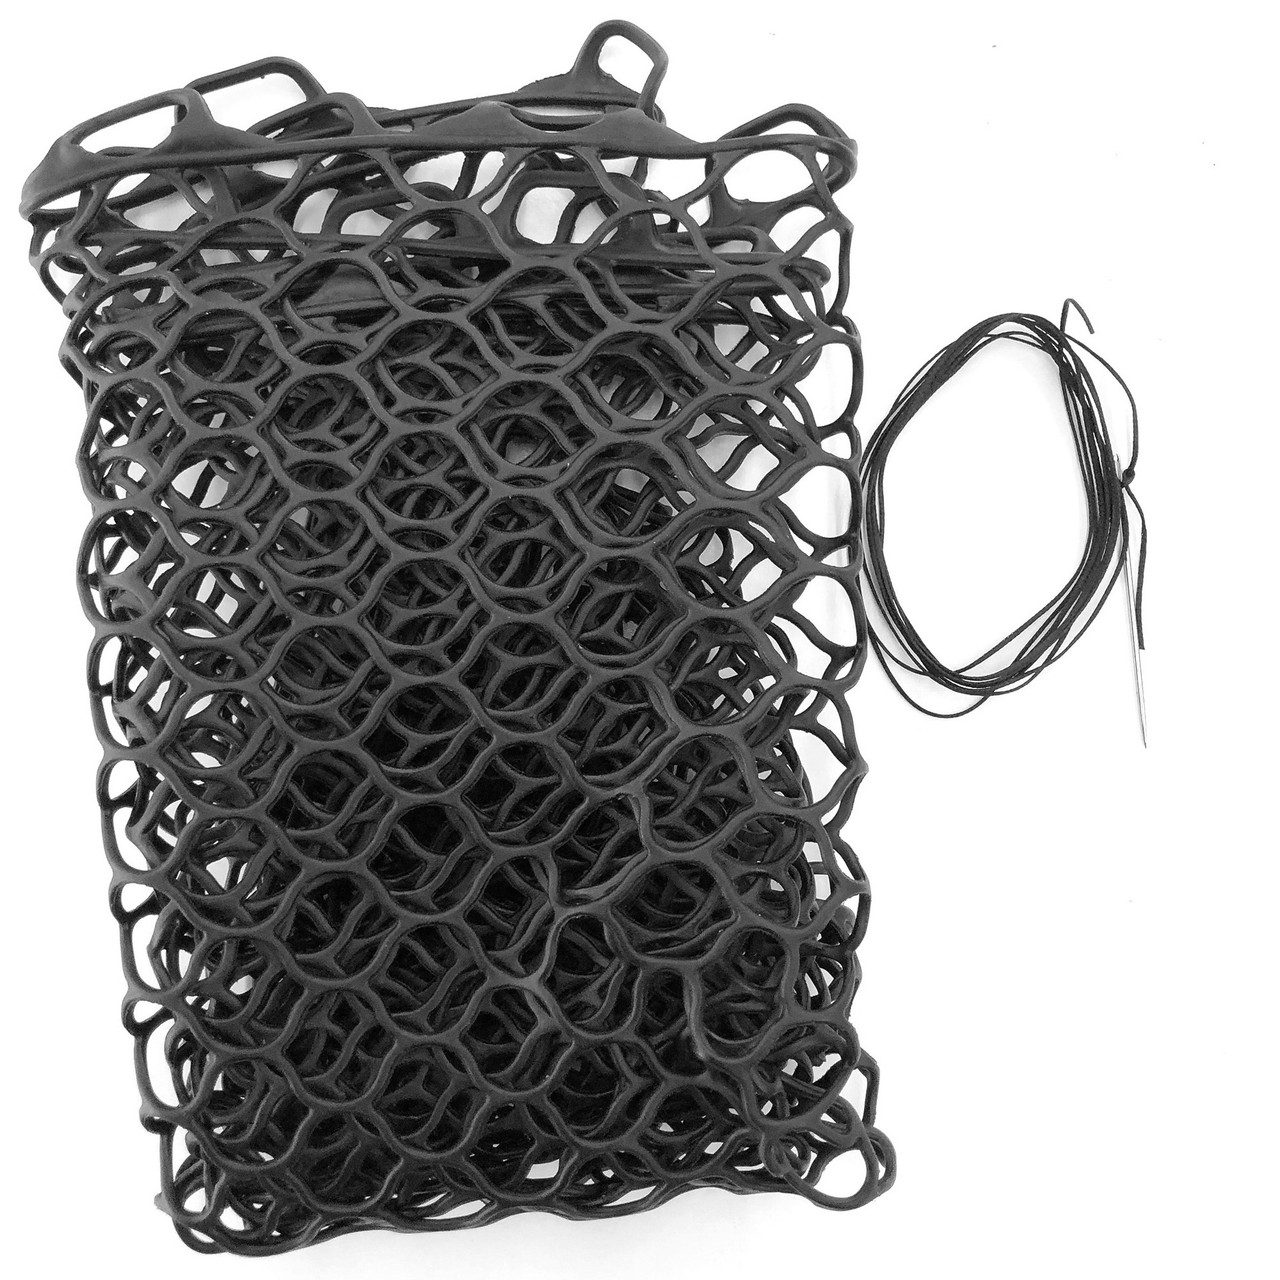 Fishpond Nomad Replacement Net Rubber Black 19 Extra Deep